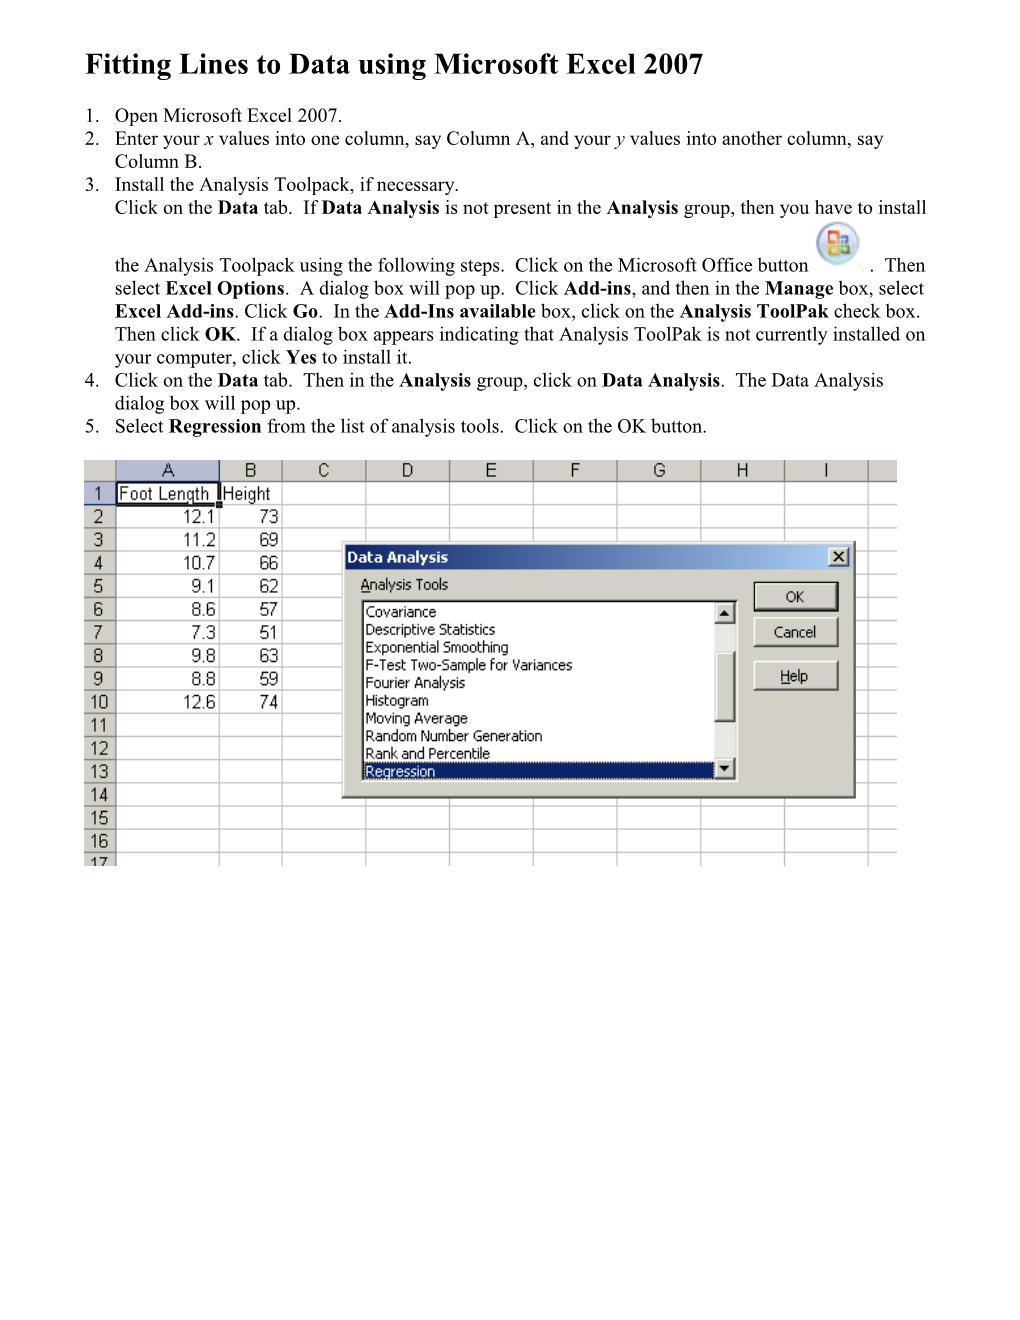 Fitting Lines to Data Using Microsoft Excel 2007